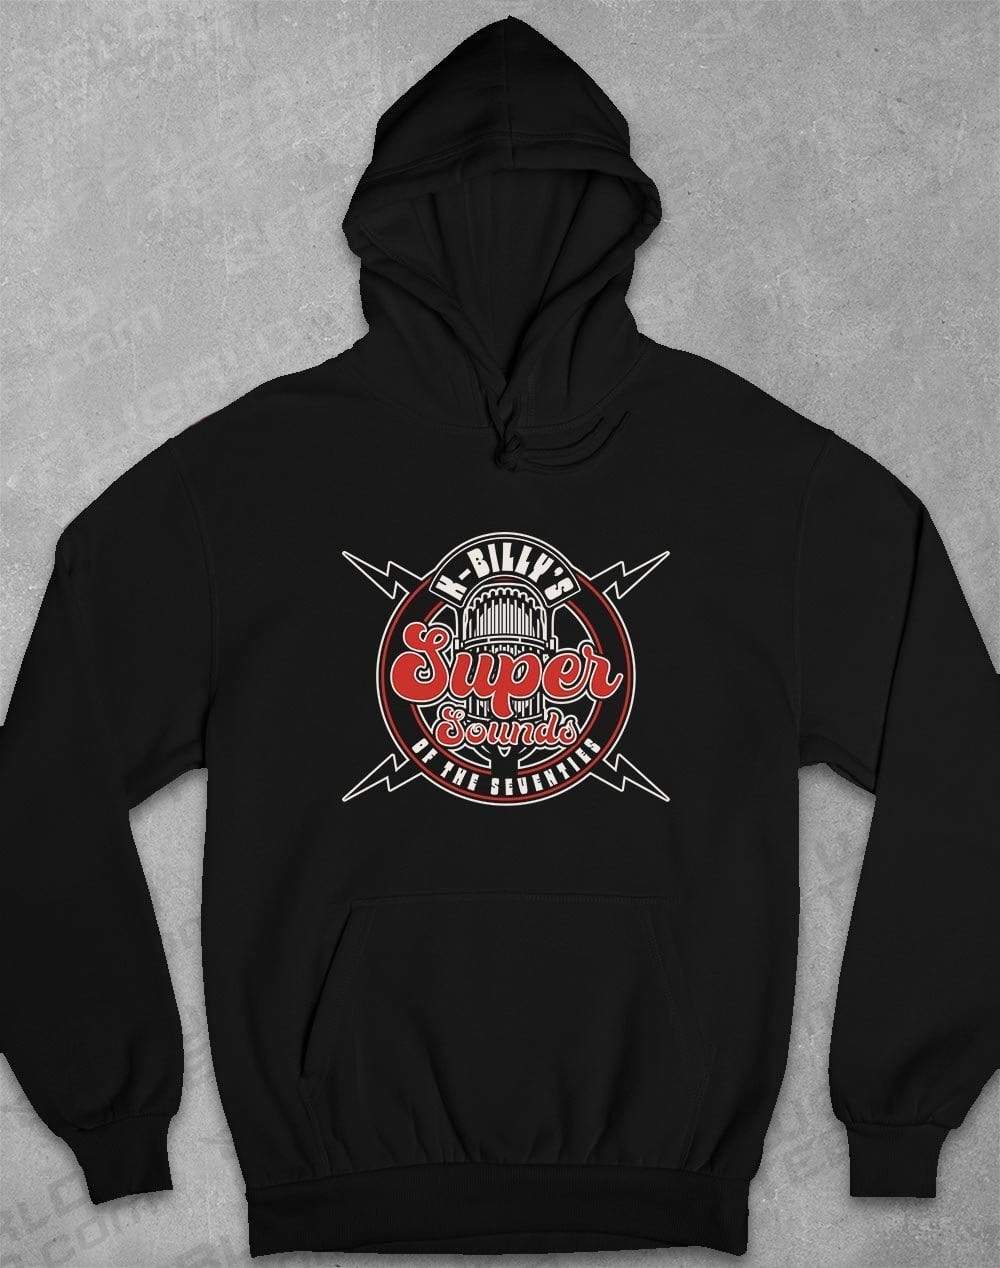 K-Billy's Super Sounds Hoodie S / Black  - Off World Tees